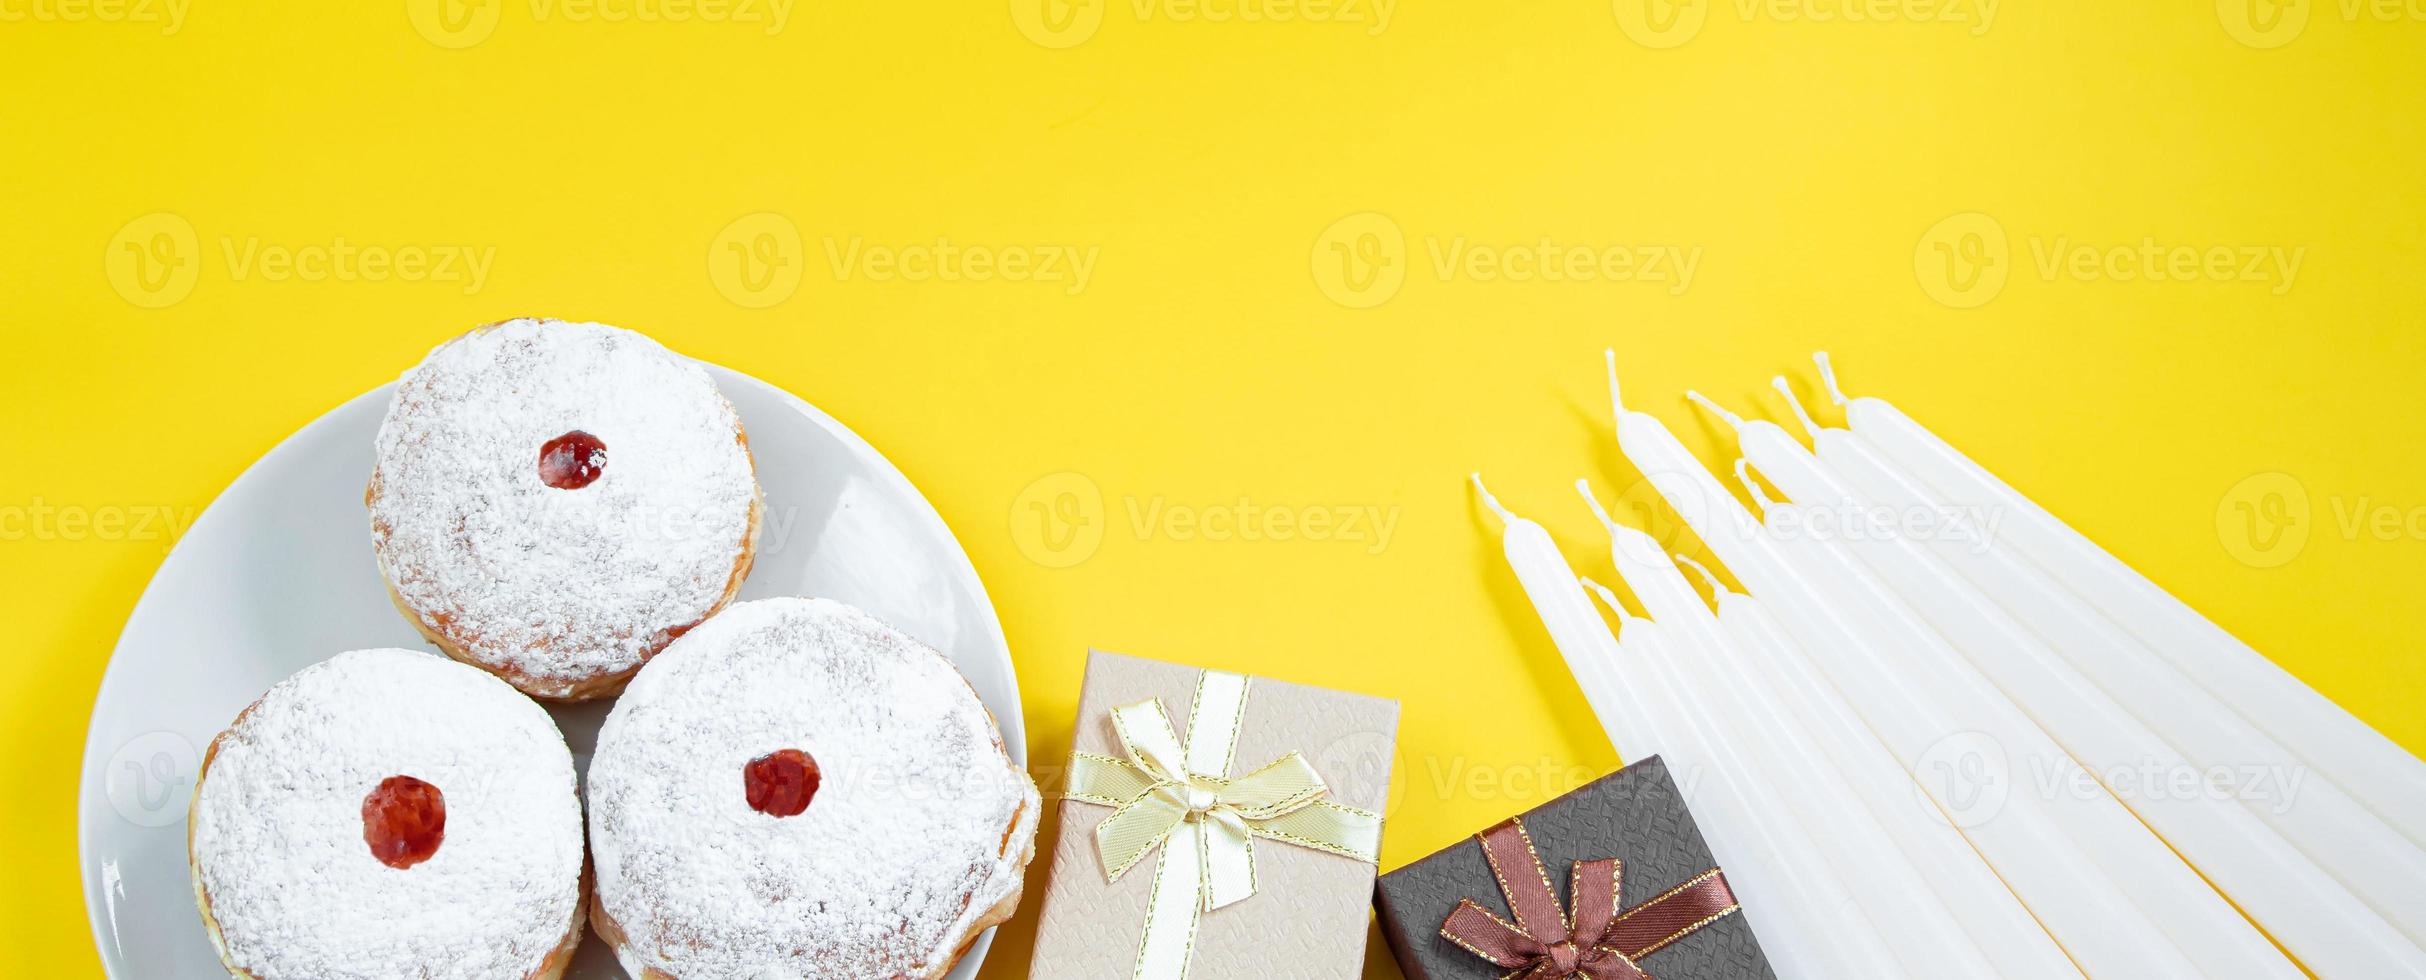 Happy Hanukkah. Jewish dessert Sufganiyot on yellow background. Symbols of religious Judaism holiday. Donuts, candles and gift. photo